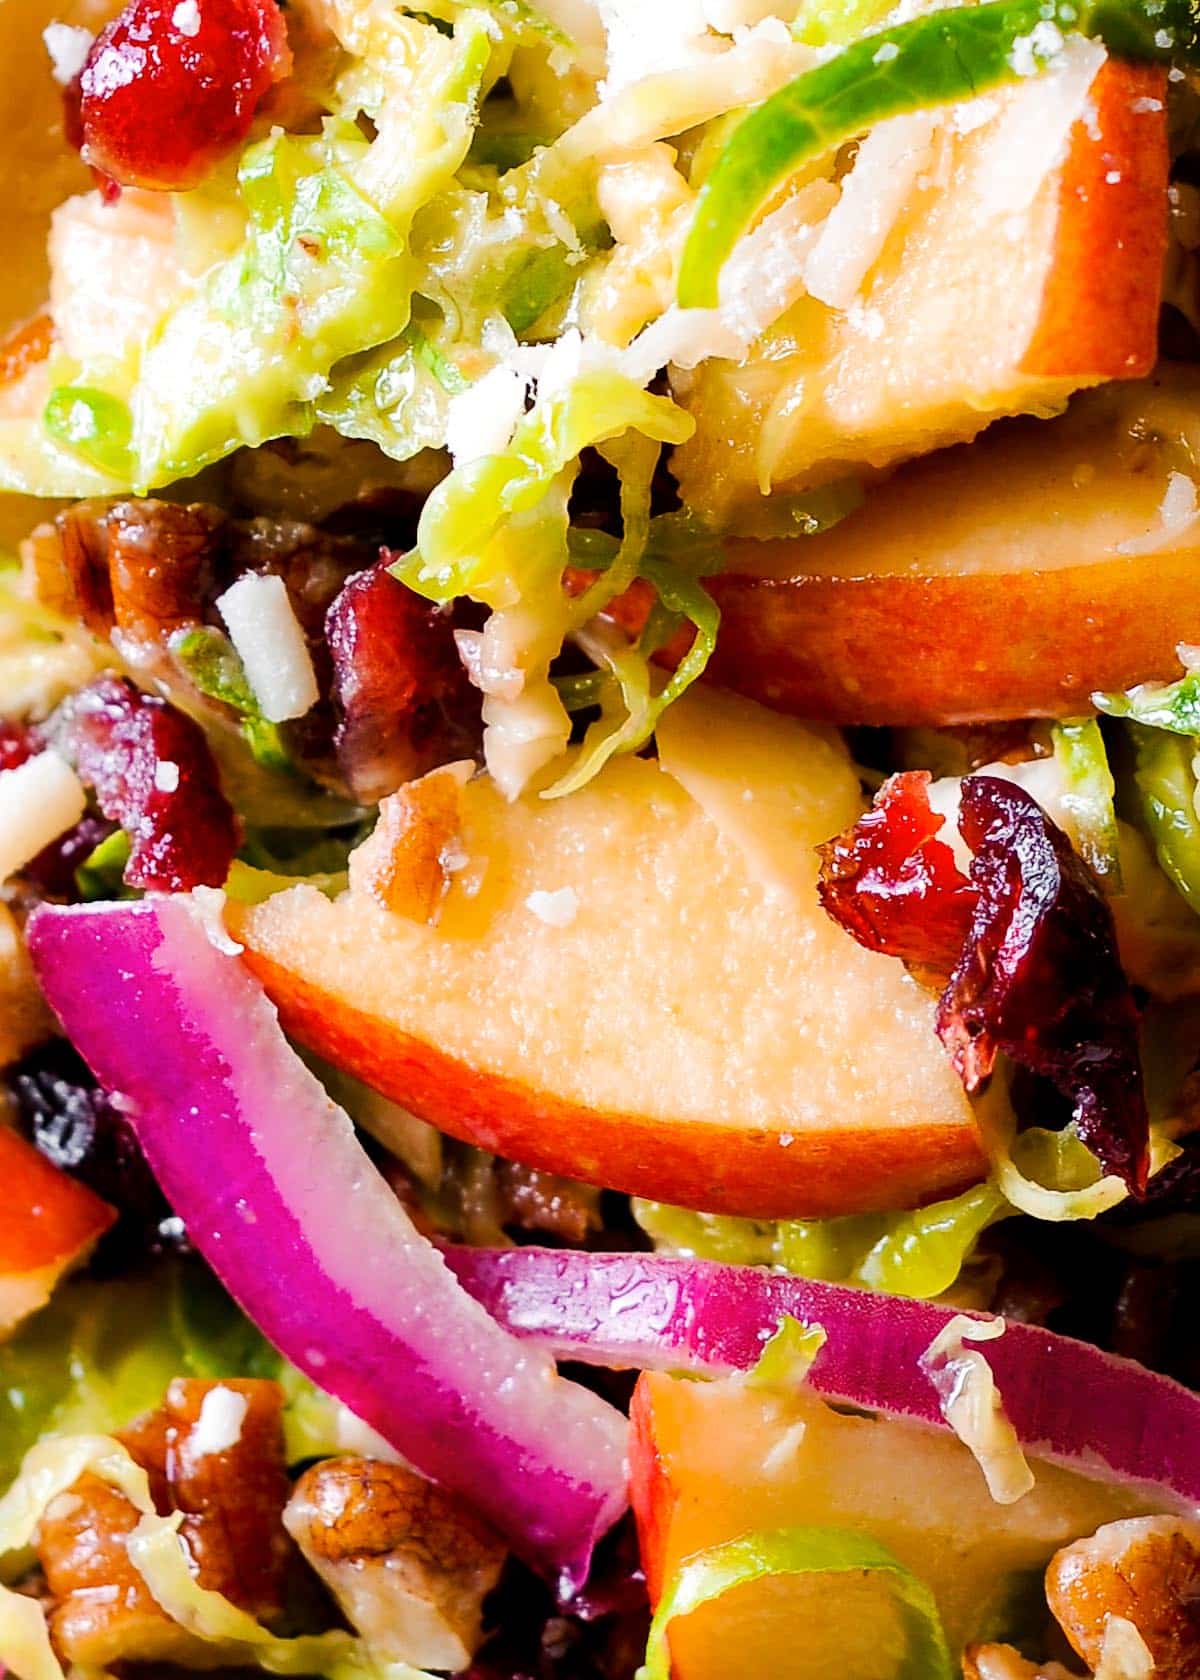 Honey Mustard Brussels Sprout Salad with Cranberries, Apples and Pecan